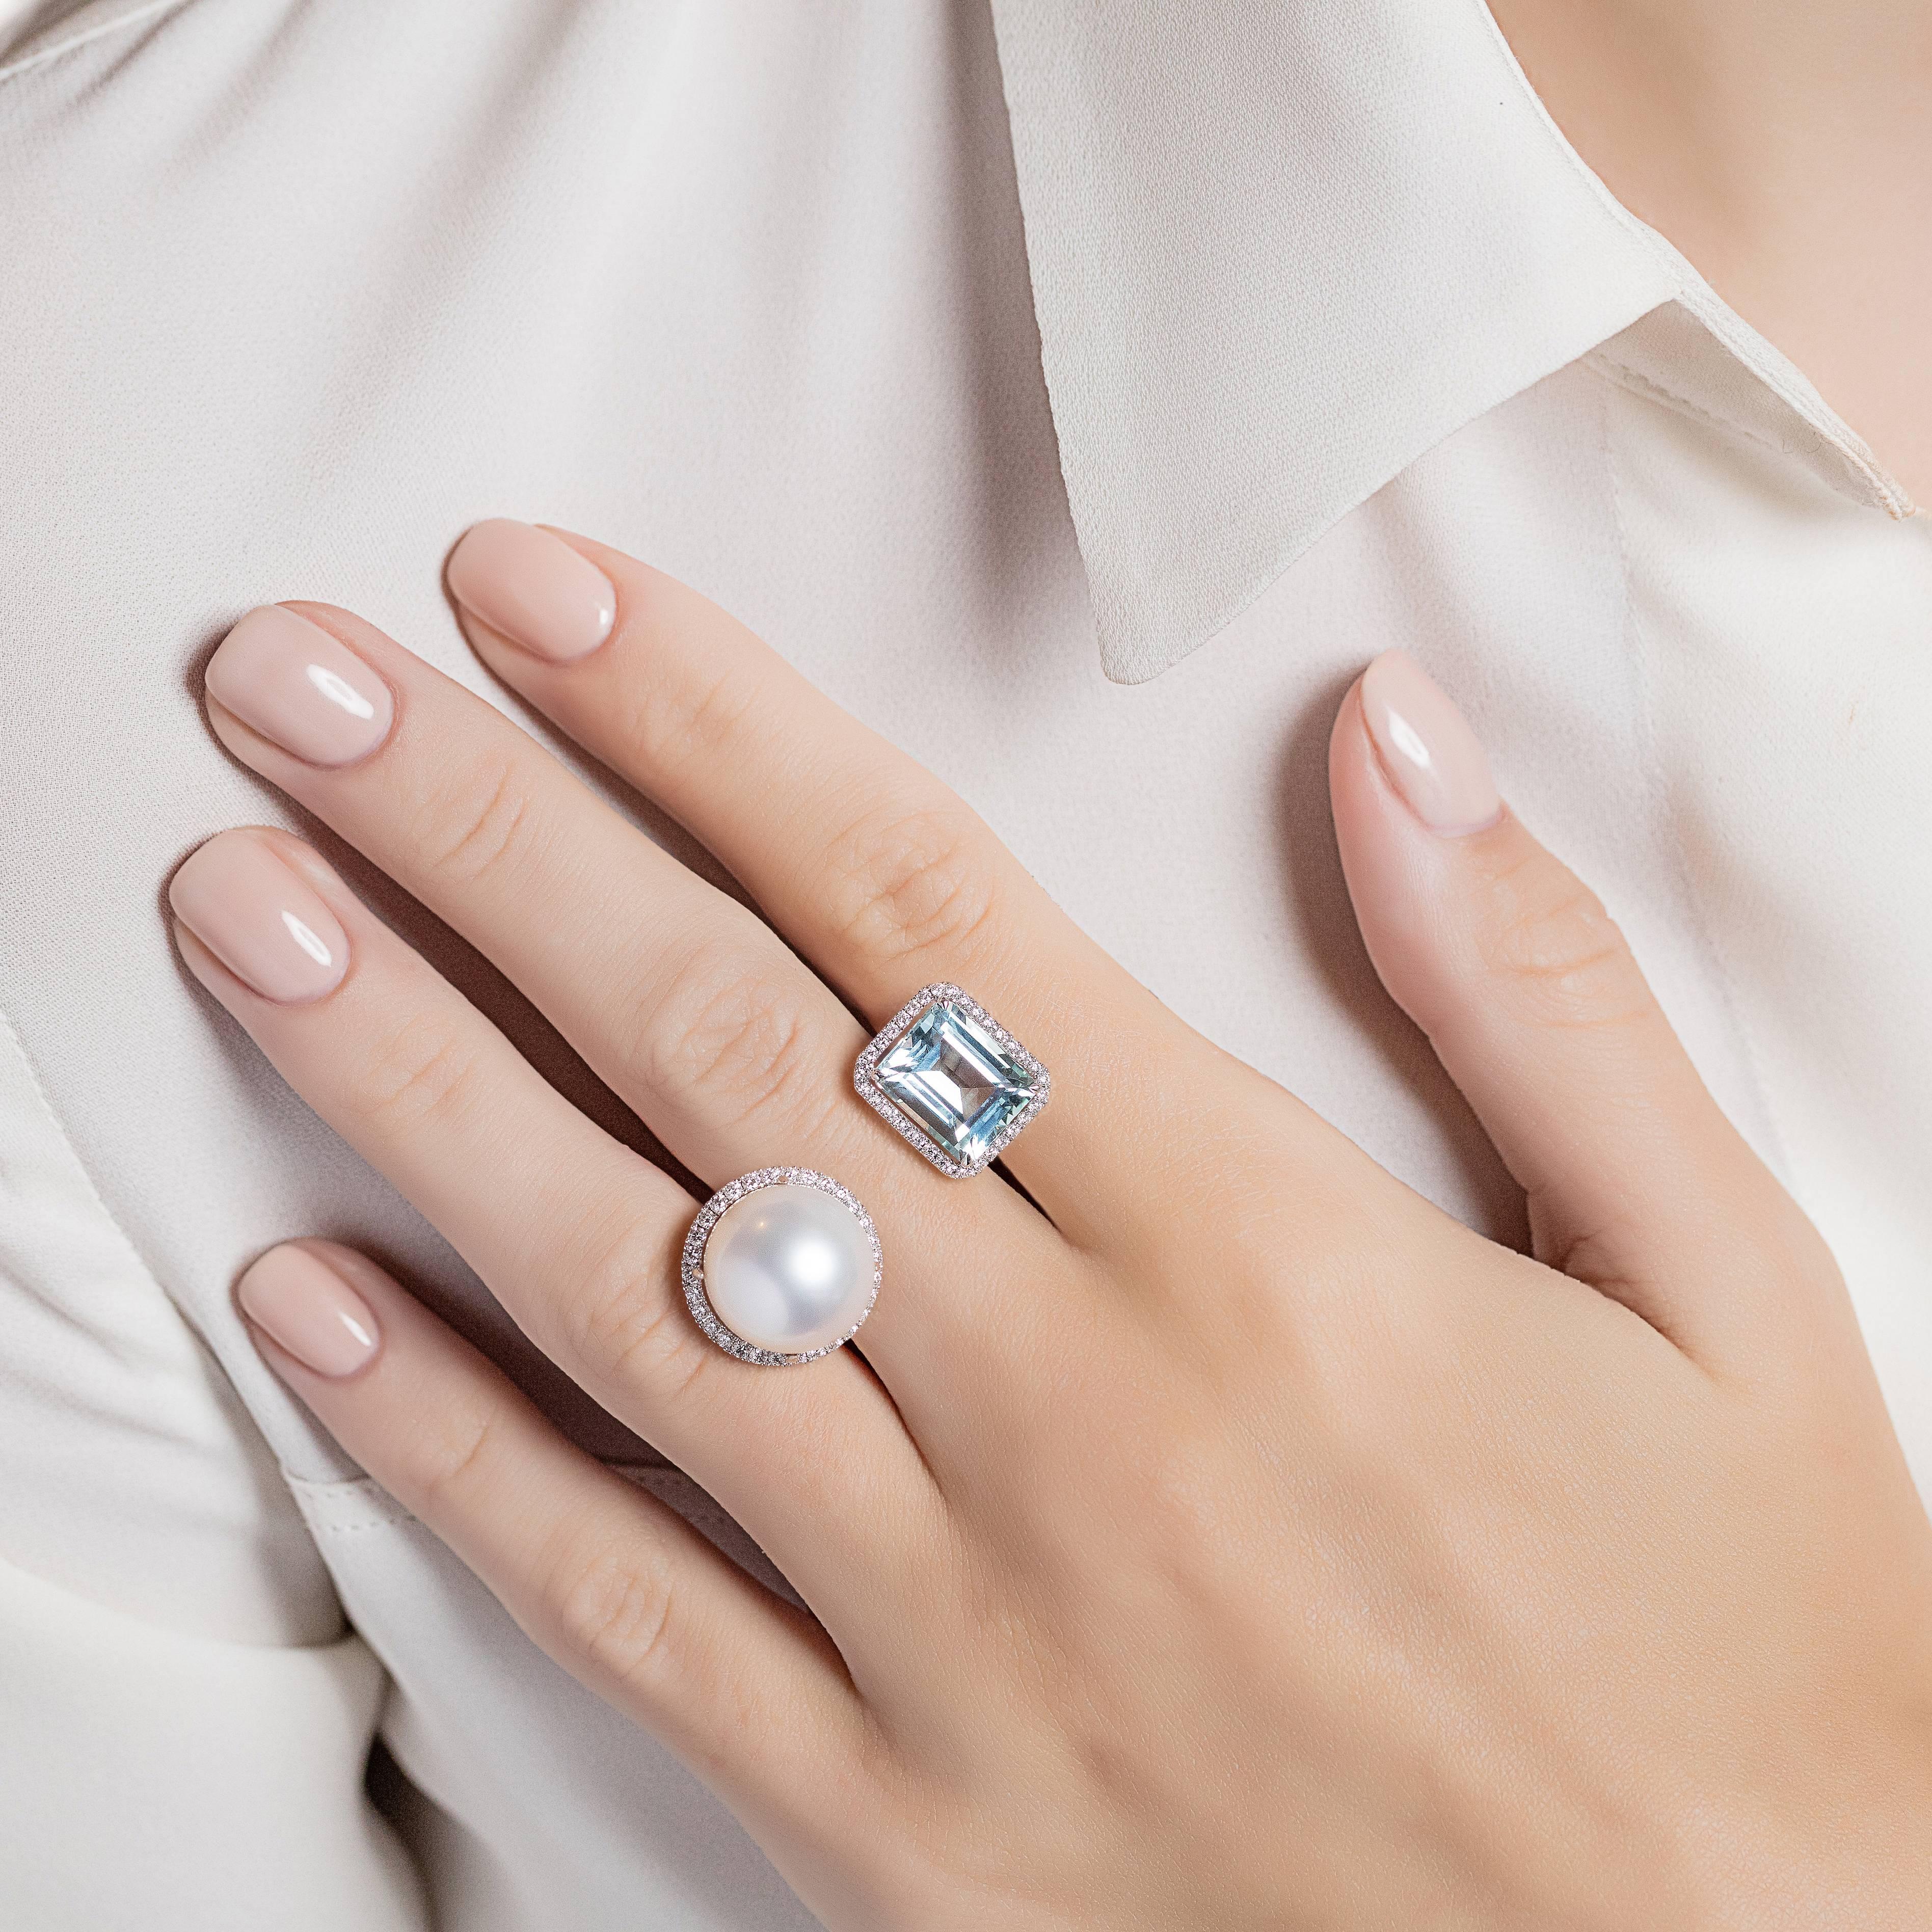 A striking between the finger ring made from white gold with aquamarine and a white south sea pearl, each surrounded with diamonds. The Elle et Lui collection symbolises the interaction of extremes – men and woman – which formed the basis for the